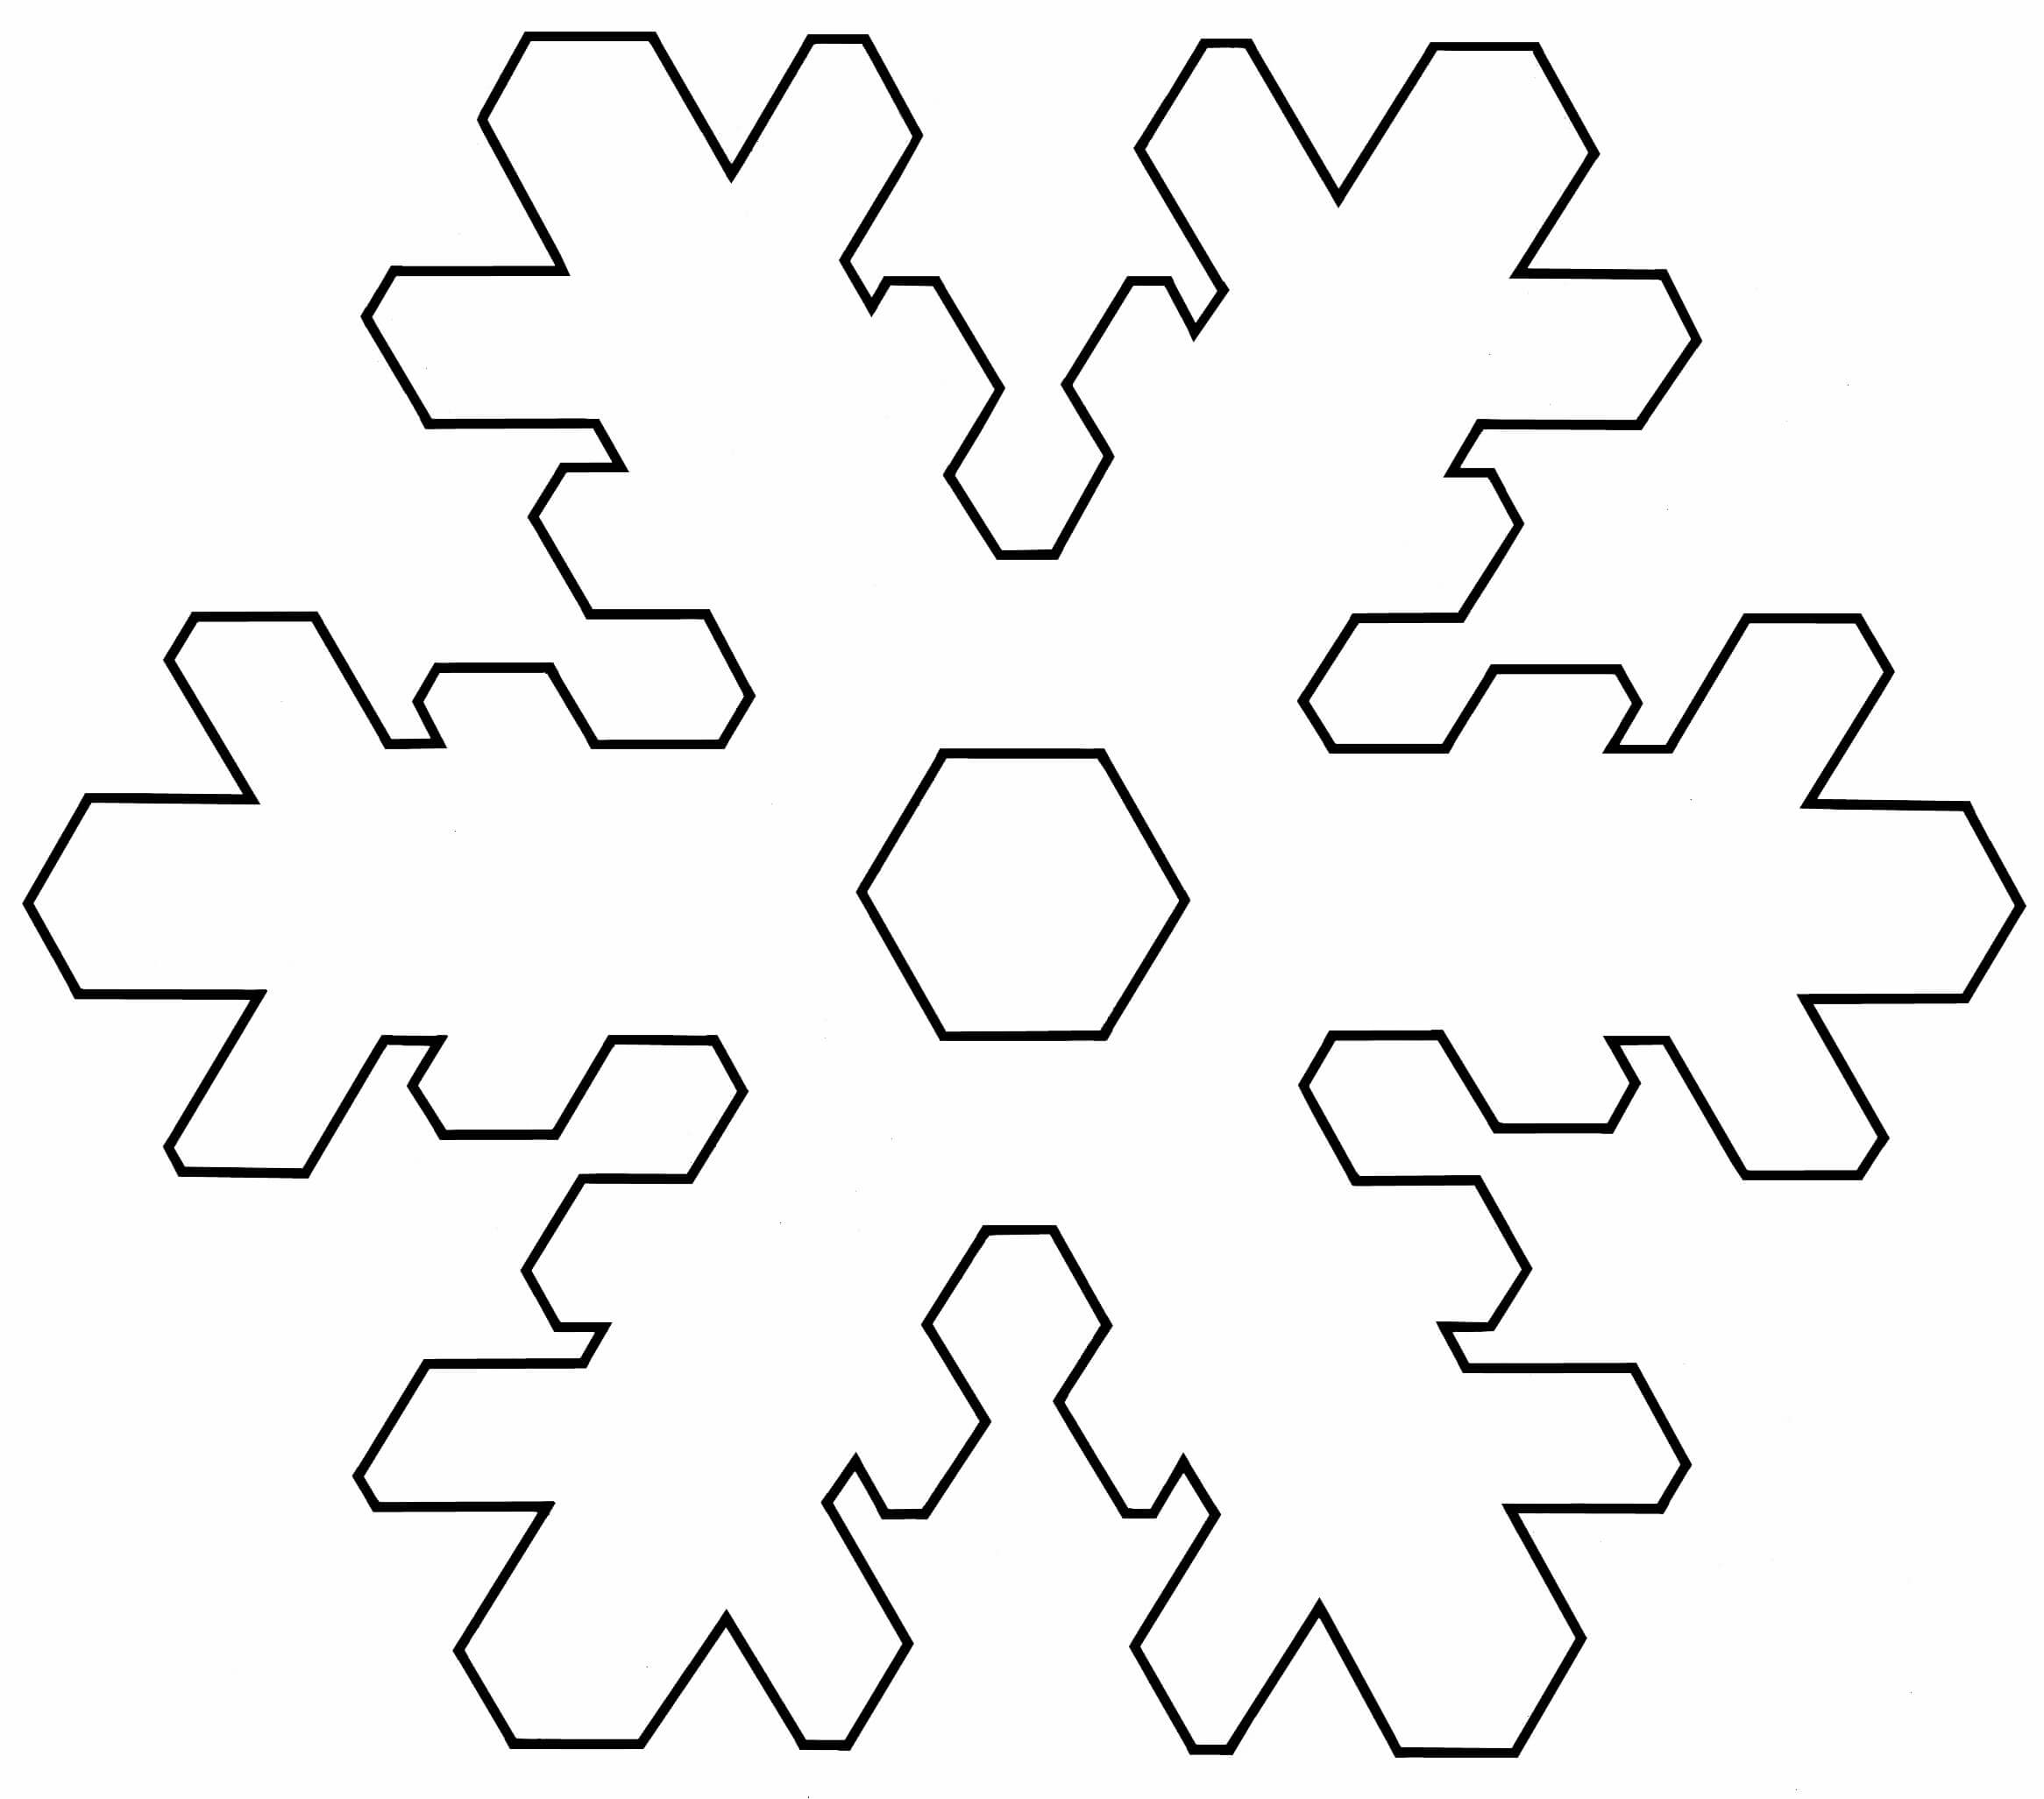 Snowflake Template With 6 Points | Templates And Samples Throughout Blank Snowflake Template